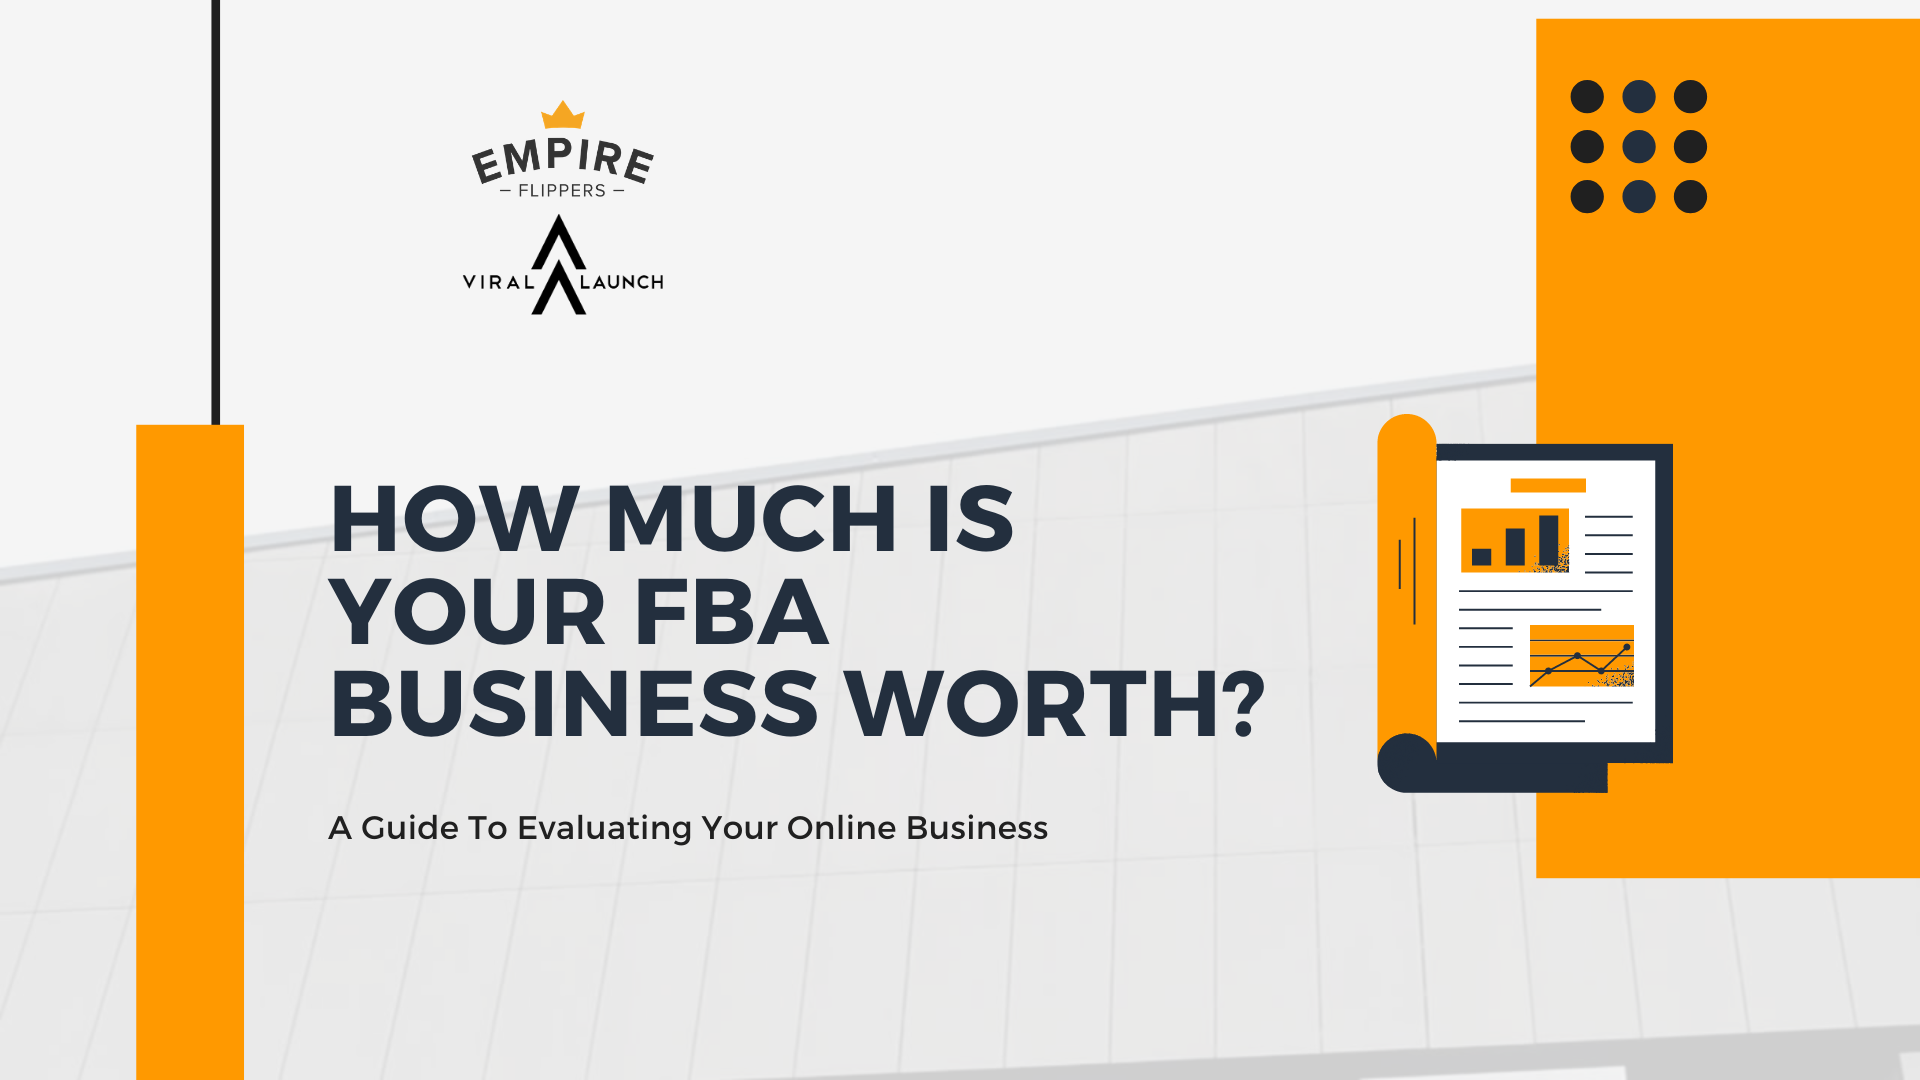 how much is your fba business worth? by empire flippers